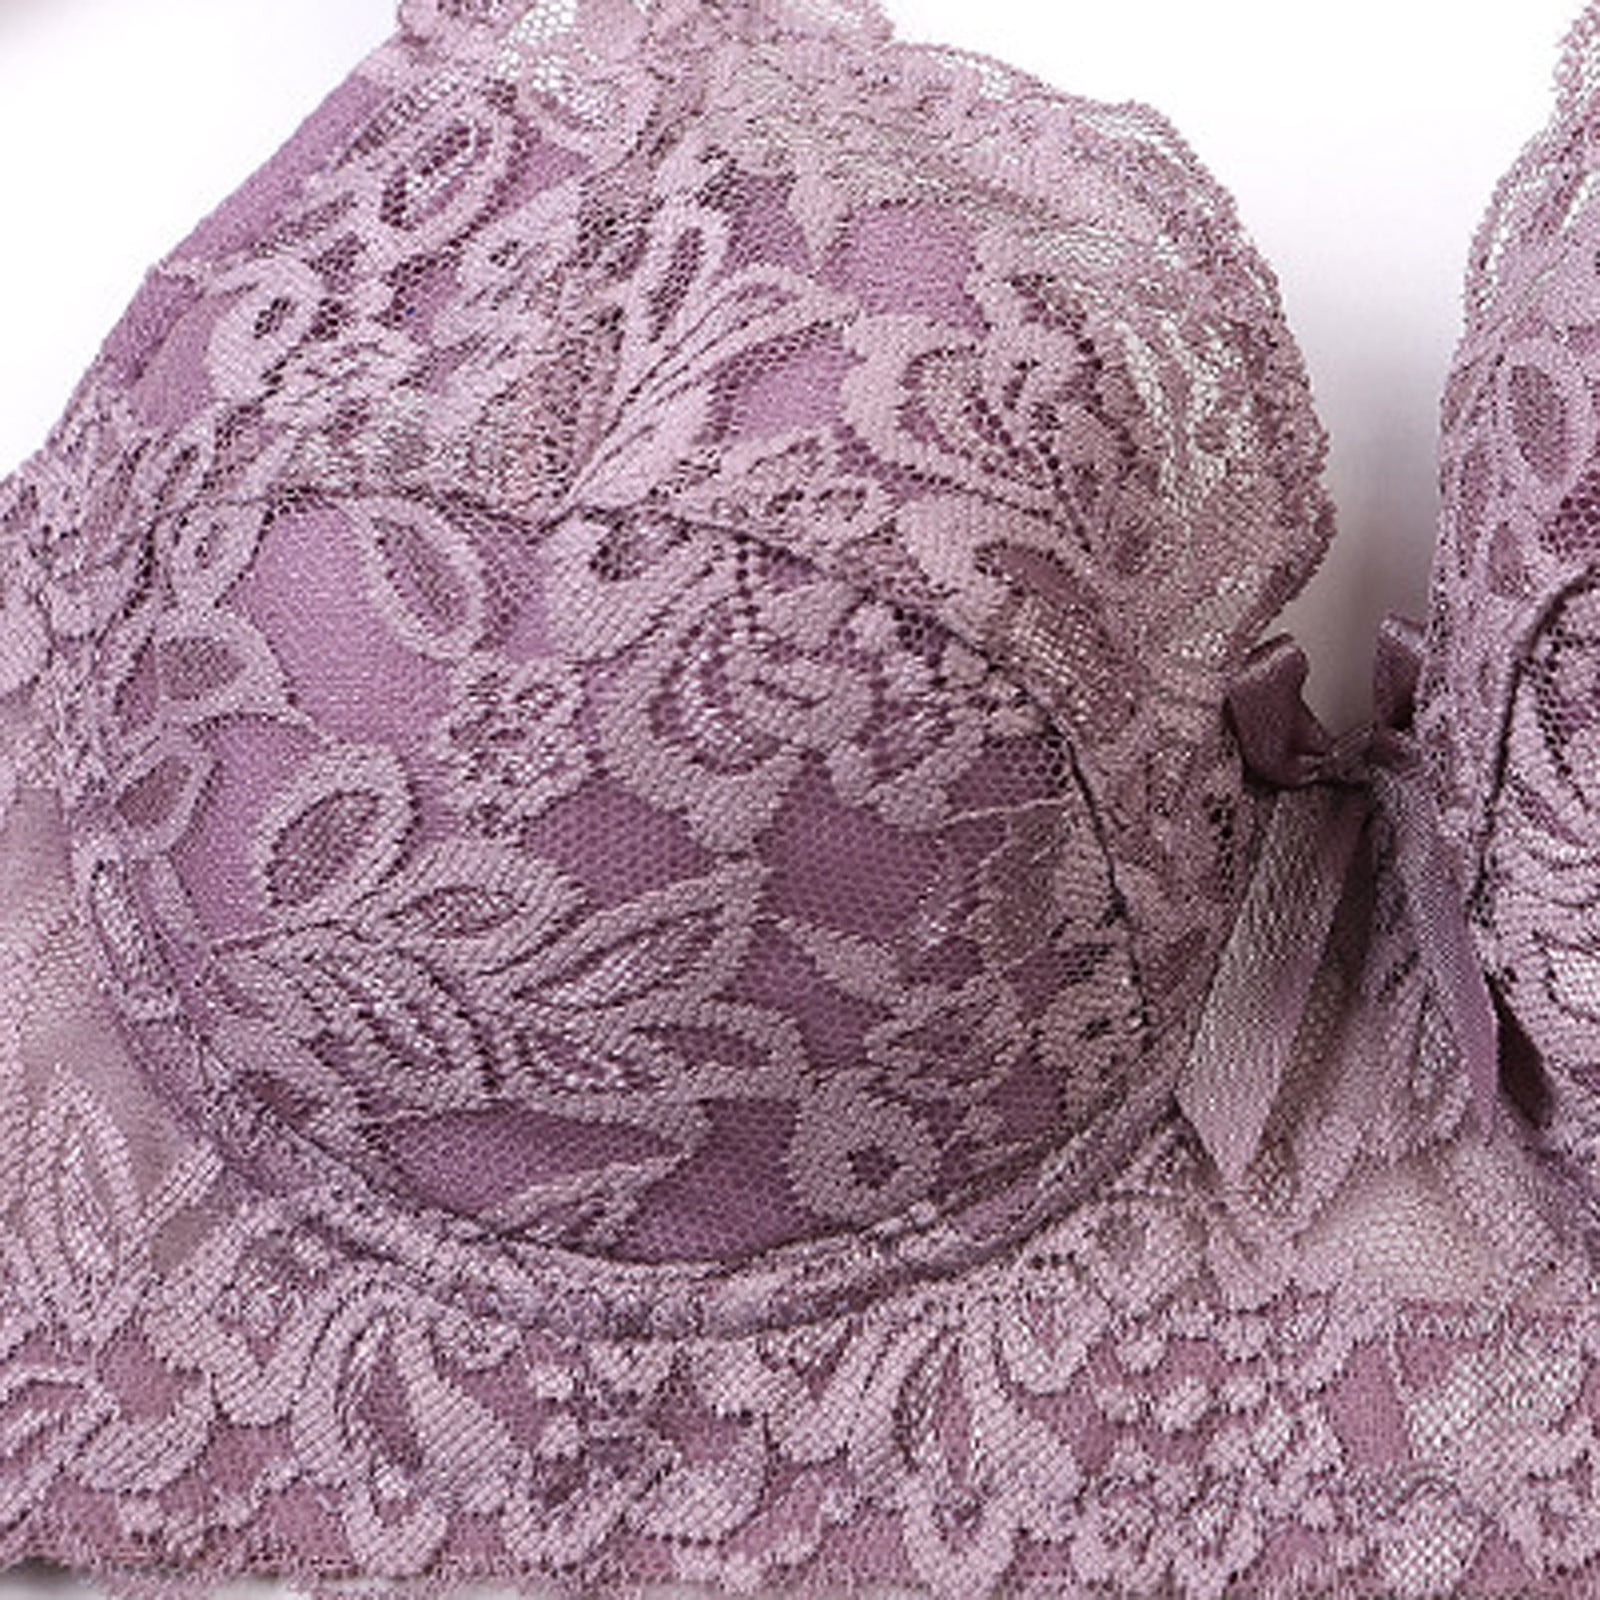 Large Size Bra For Older Women Front Closure, Valentine's Day, Back  Seamless Lace Bra